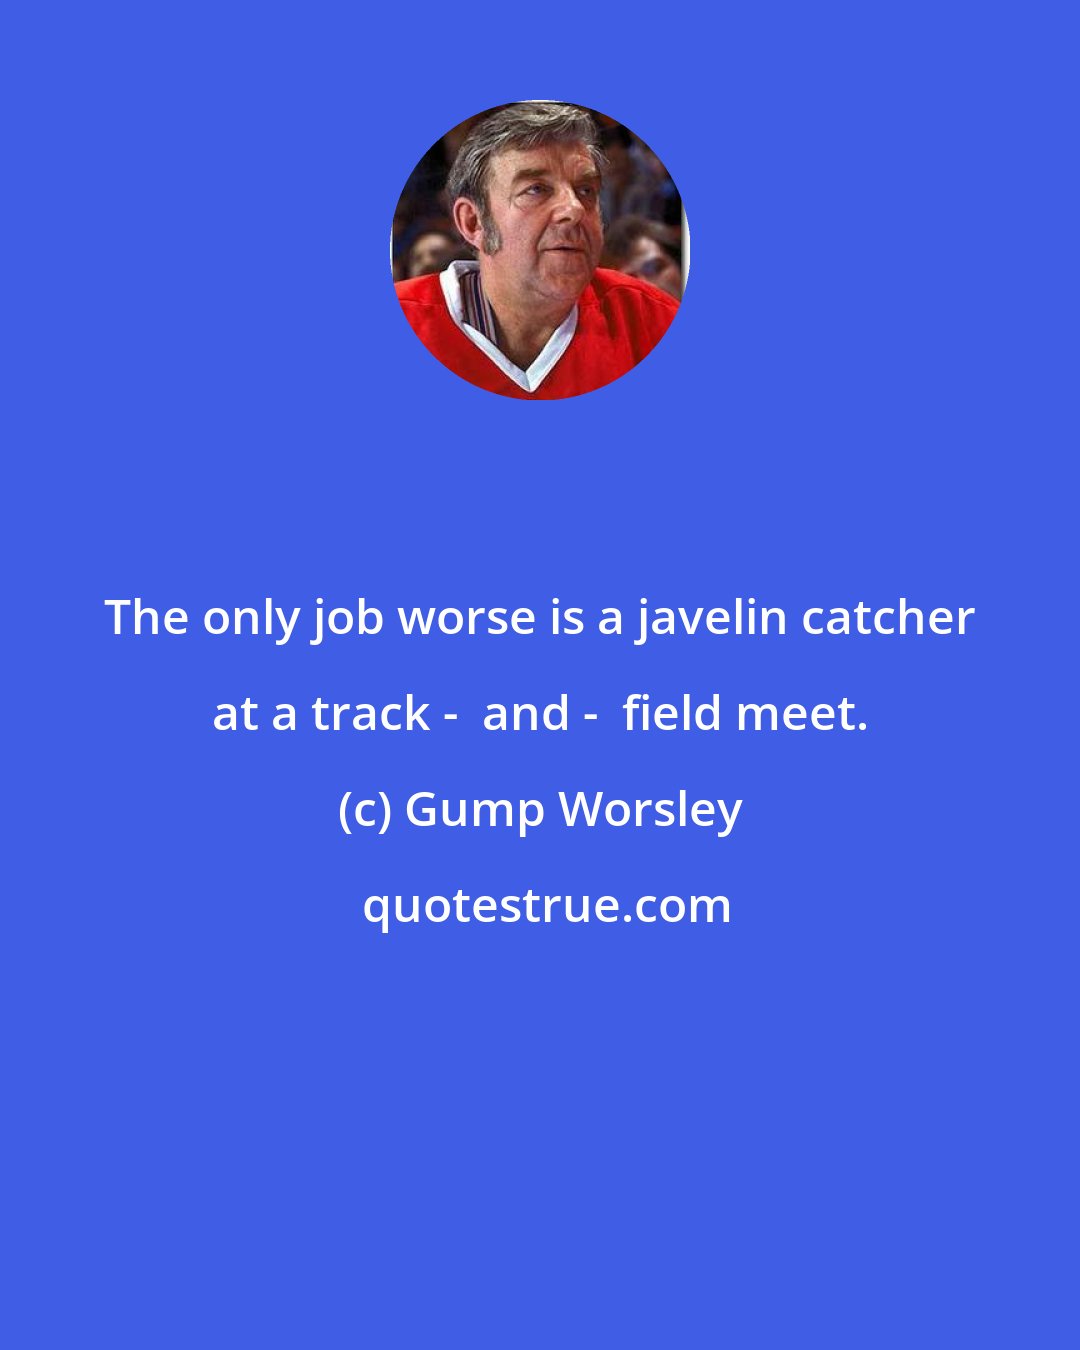 Gump Worsley: The only job worse is a javelin catcher at a track -  and -  field meet.